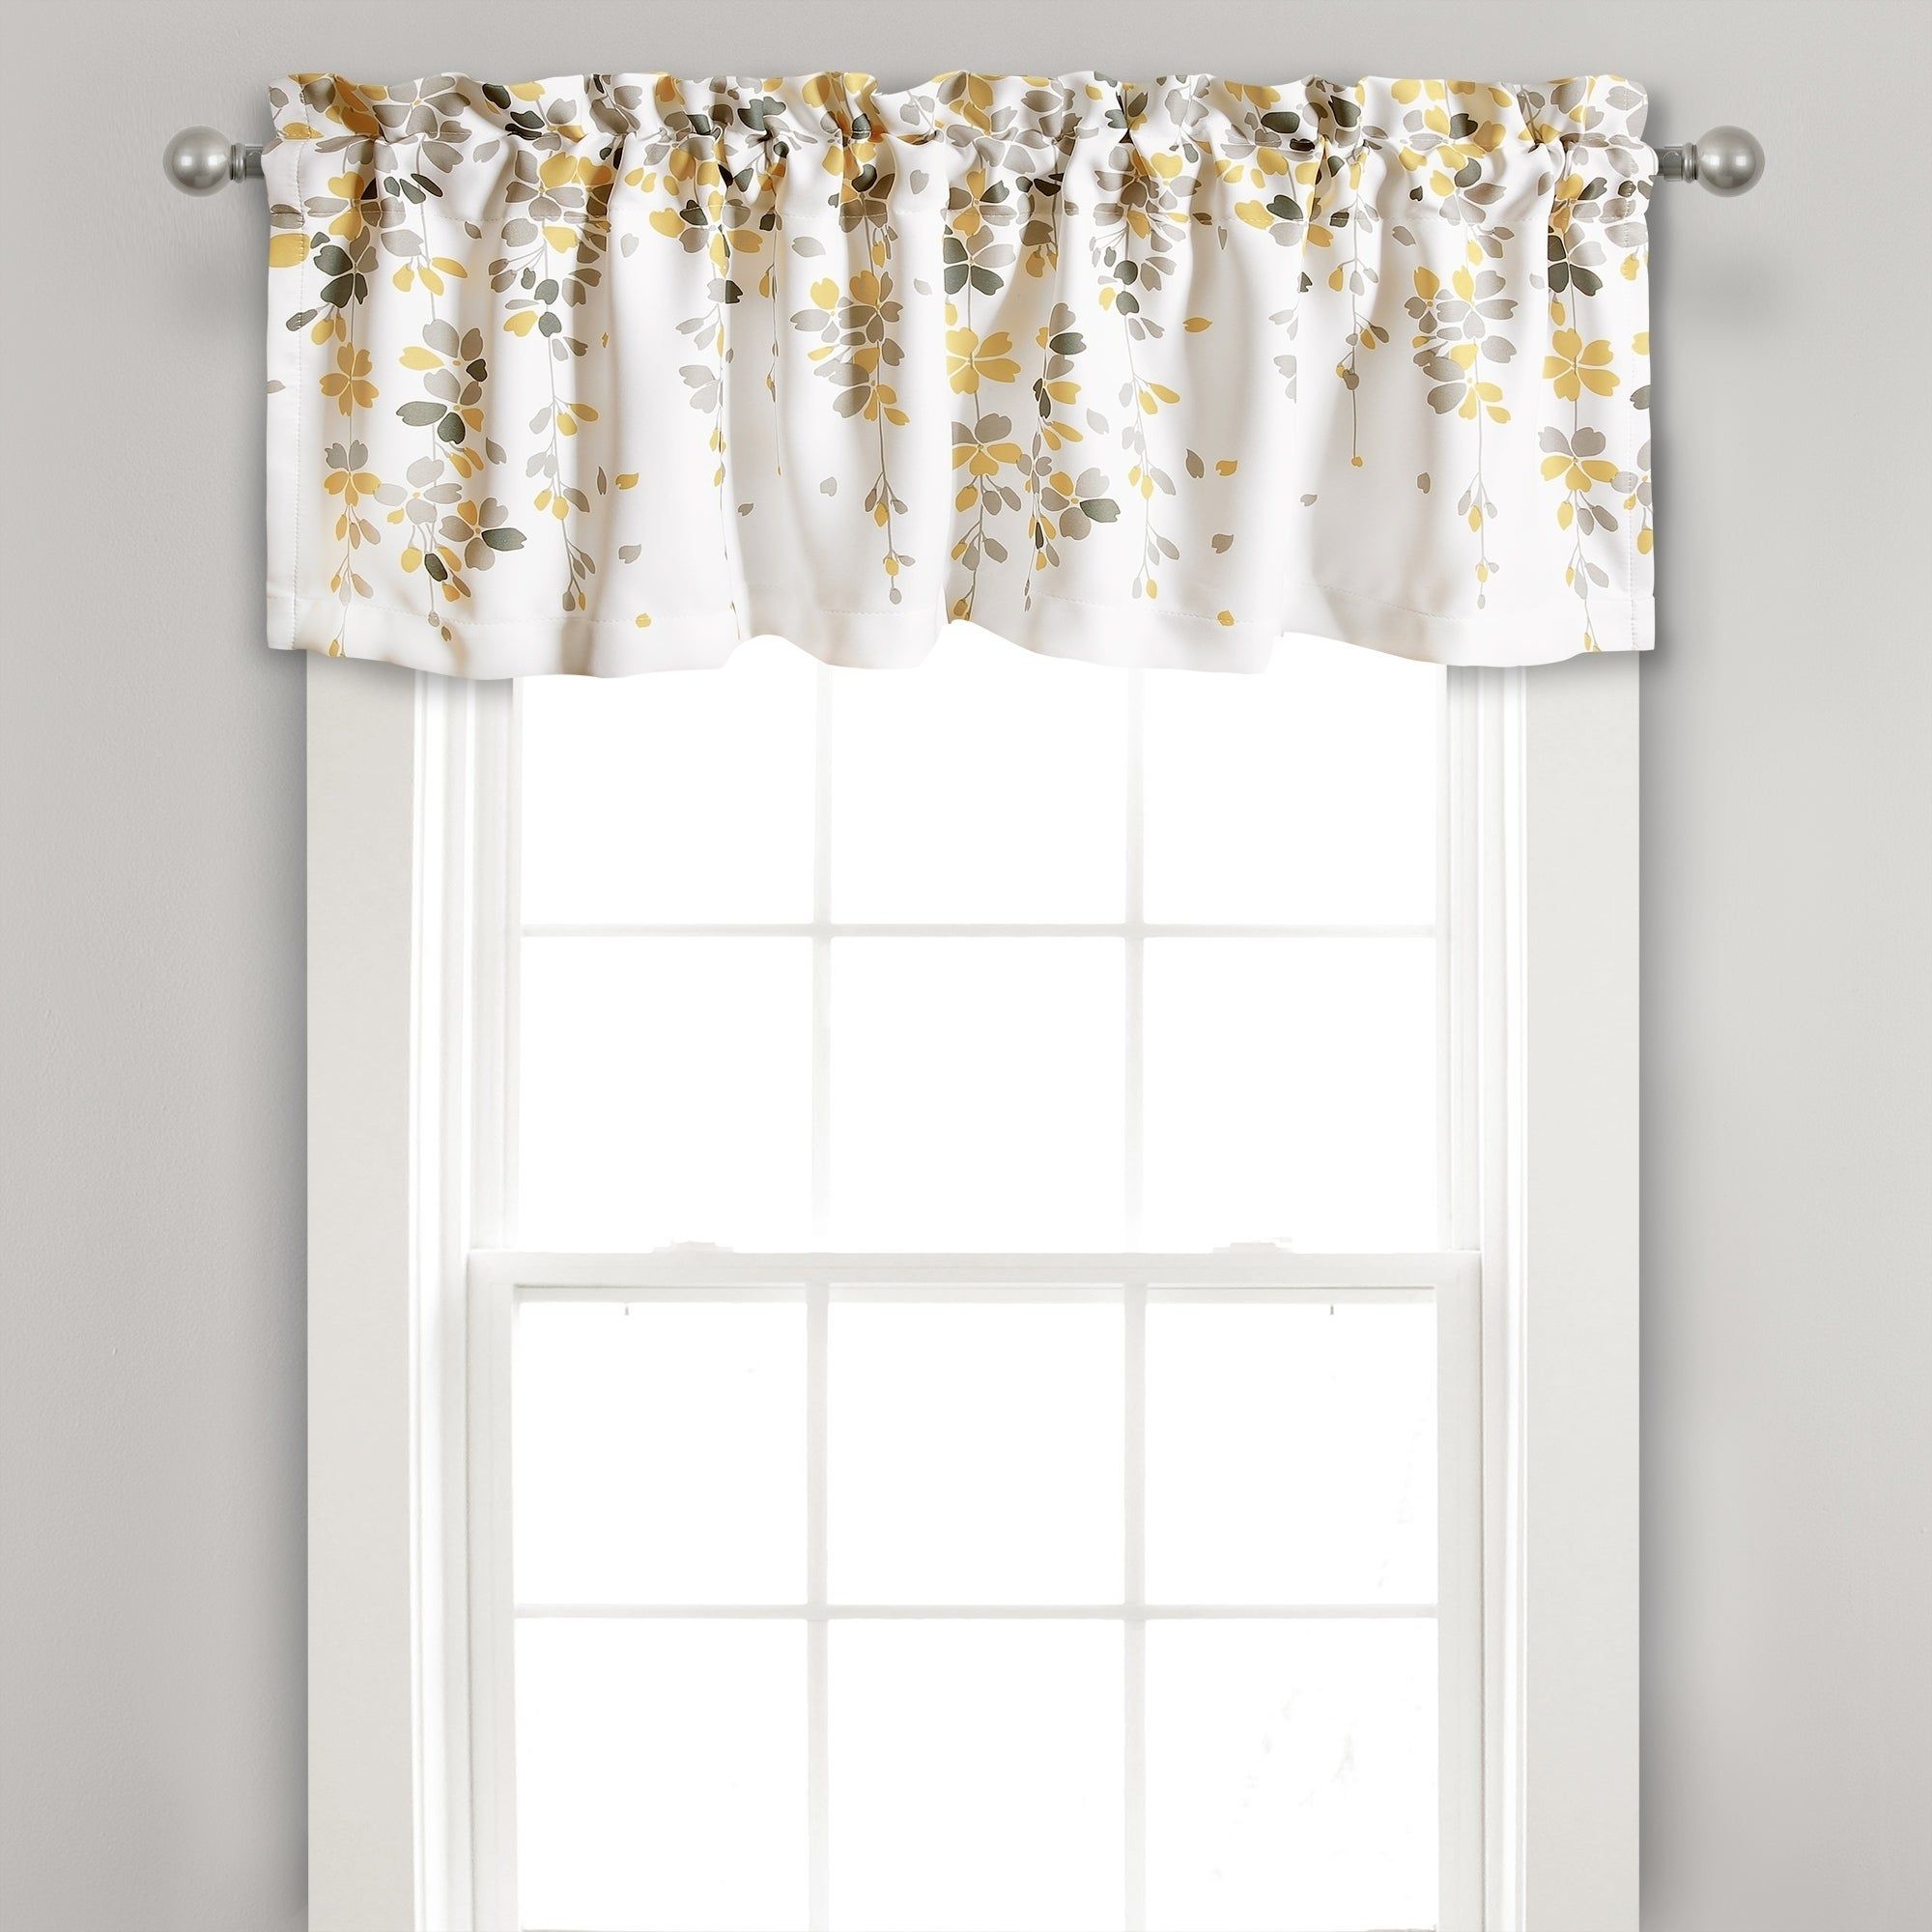 Lush Decor Weeping Flower Room Darkening Window Curtain Valance – 52x18 Regarding Traditional Tailored Tier And Swag Window Curtains Sets With Ornate Flower Garden Print (View 13 of 20)